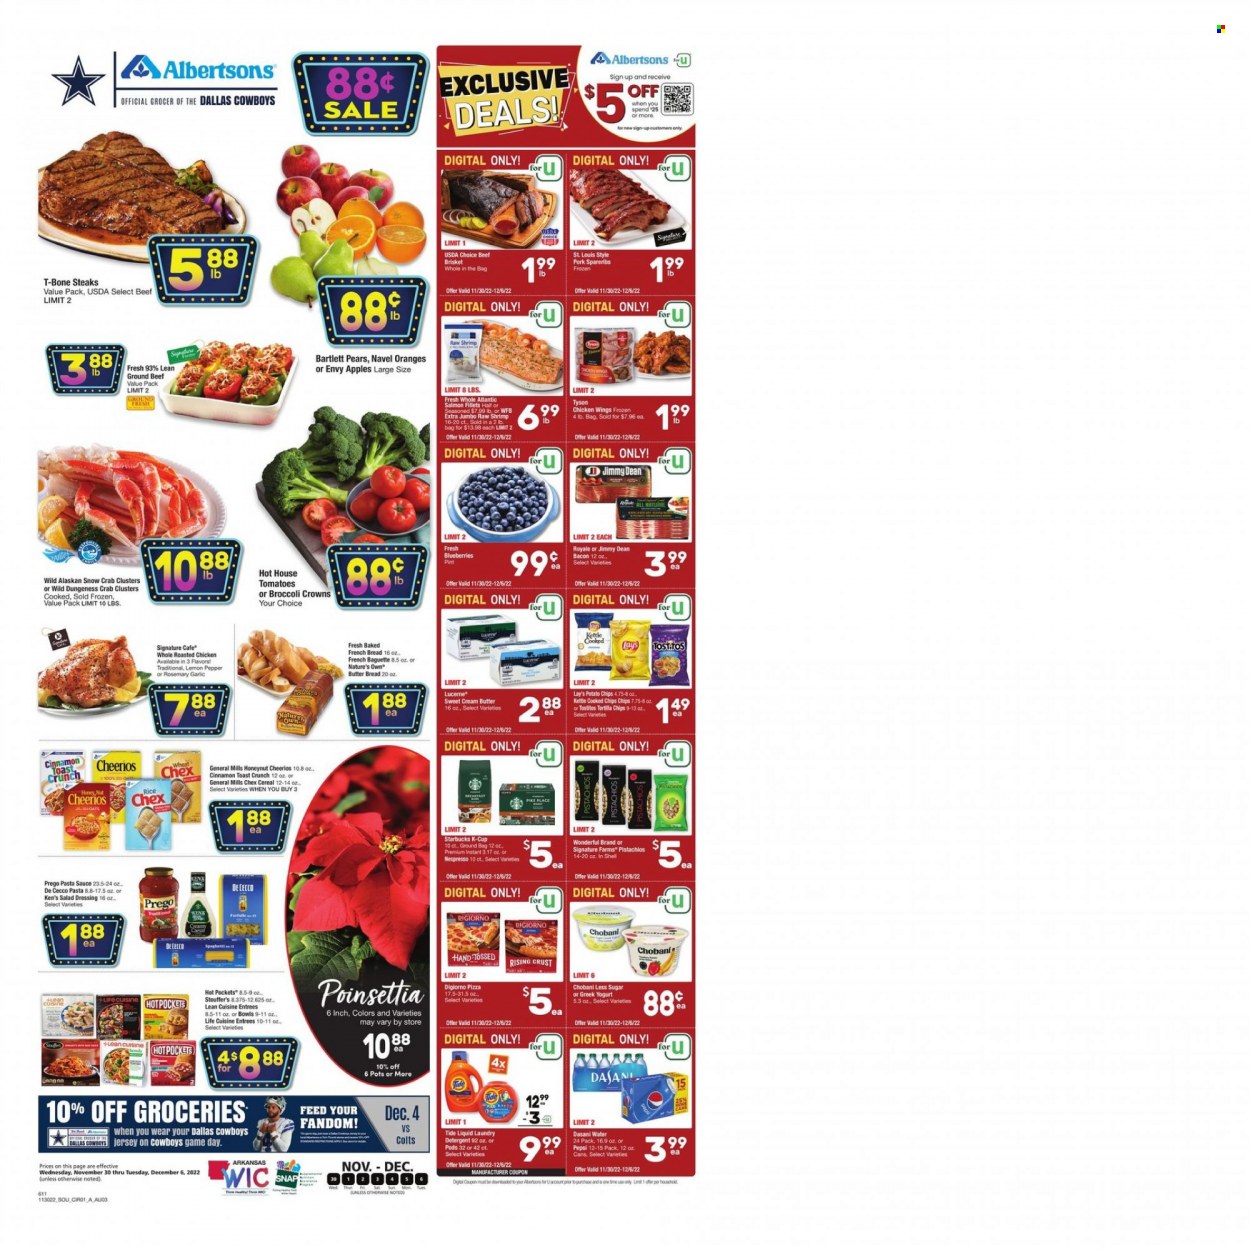 thumbnail - Albertsons Flyer - 11/30/2022 - 12/06/2022 - Sales products - baguette, tomatoes, apples, Bartlett pears, pears, oranges, crab, hot pocket, pasta sauce, sauce, Lean Cuisine, Chobani, butter, Stouffer's, chips, Lay’s, cereals, Cheerios, cinnamon, beef meat, ground beef, t-bone steak, steak, pork spare ribs, pot, poinsettia, Nature's Own, navel oranges. Page 1.